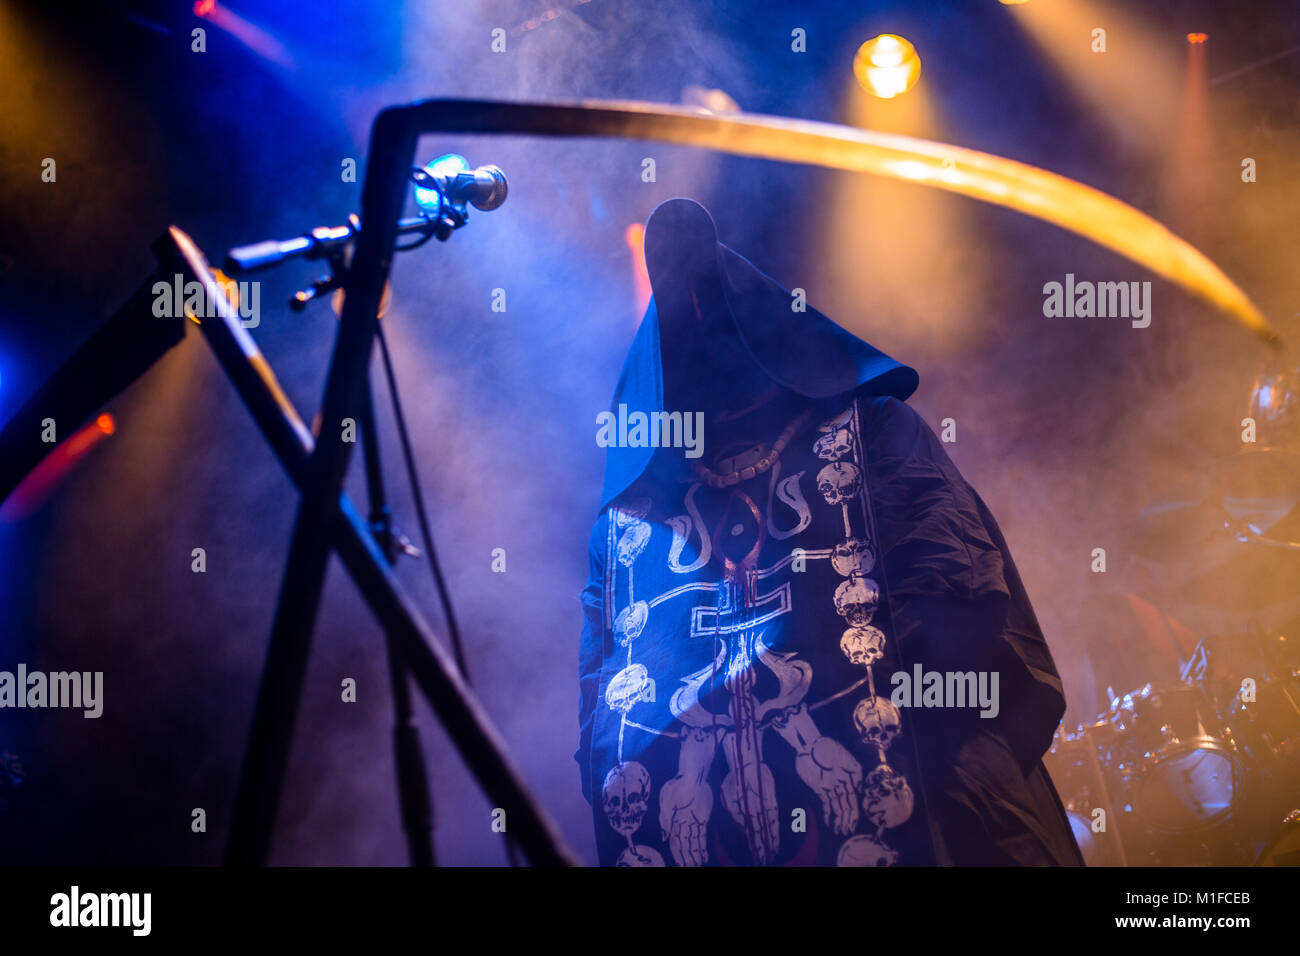 Norway, Bergen - August 24, 2017. The Czech black metal band Cult of Fire performs a live concert at the Norwegian metal festival Beyond the Gates 2017 in Bergen. Here vocalist Devilish is seen live on stage. (Photo credit: Gonzales Photo / Jarle H. Moe). Stock Photo